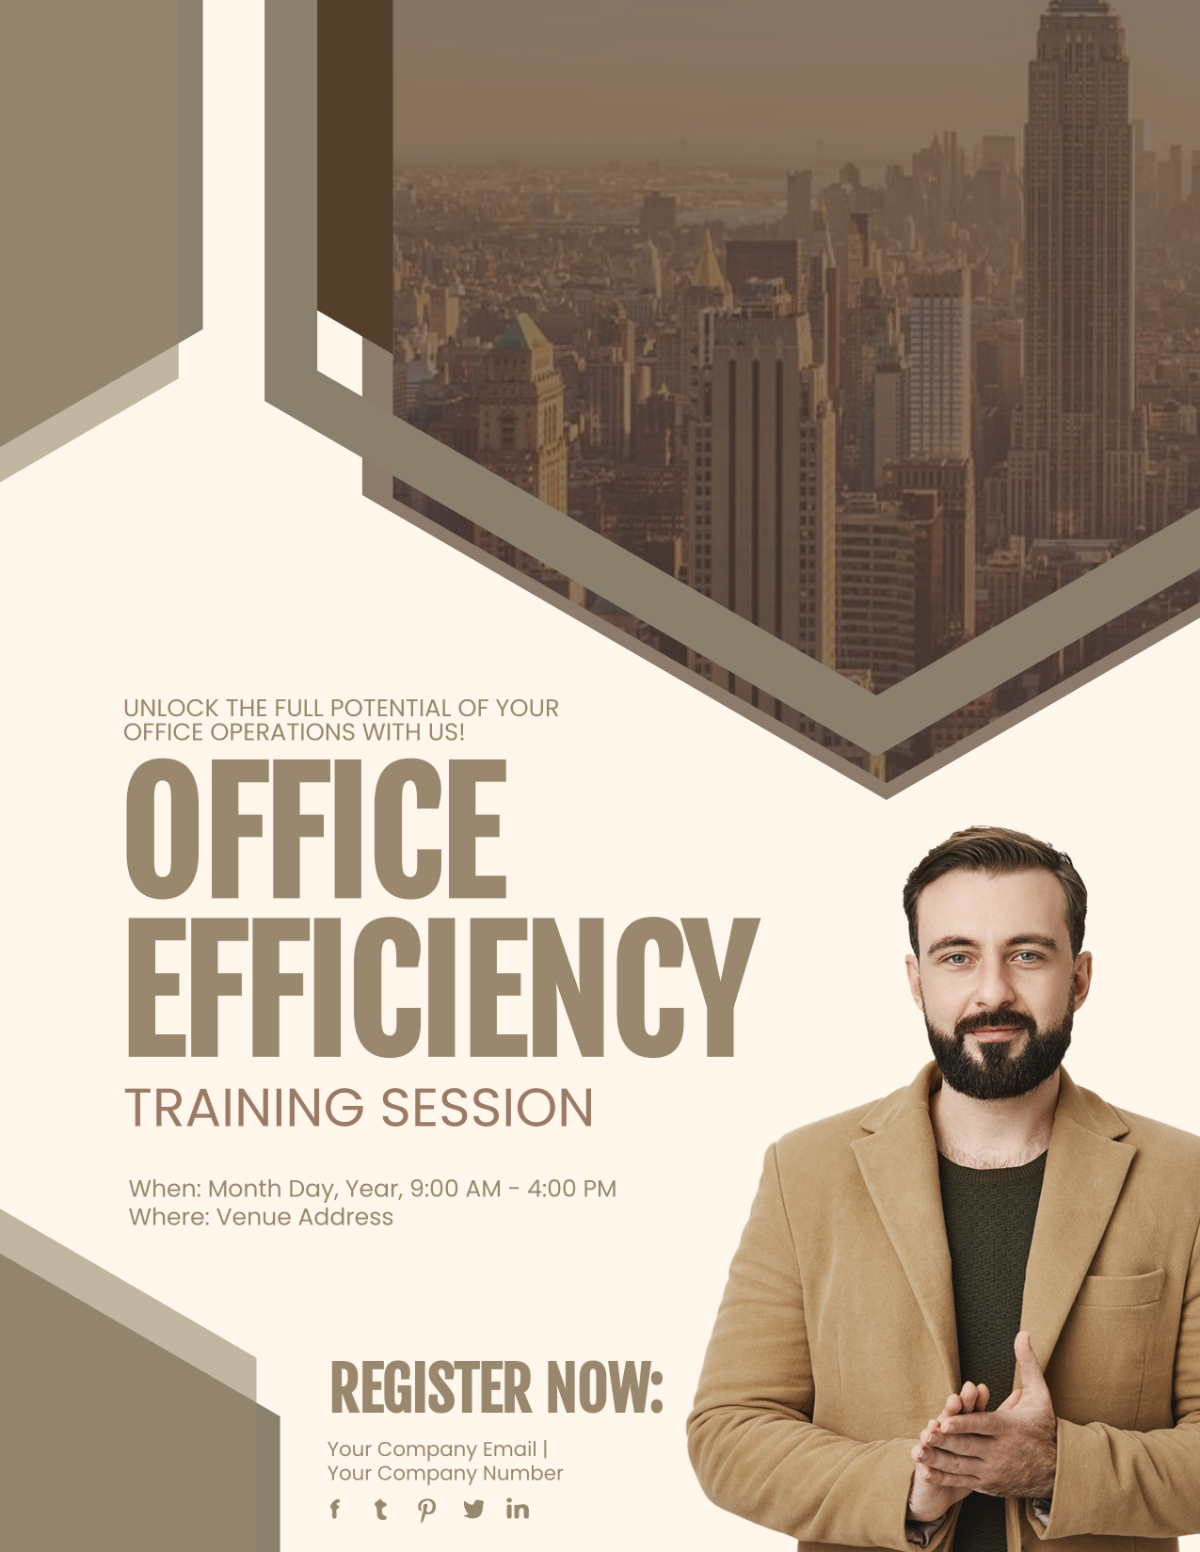 Office Efficiency Training Session Flyer